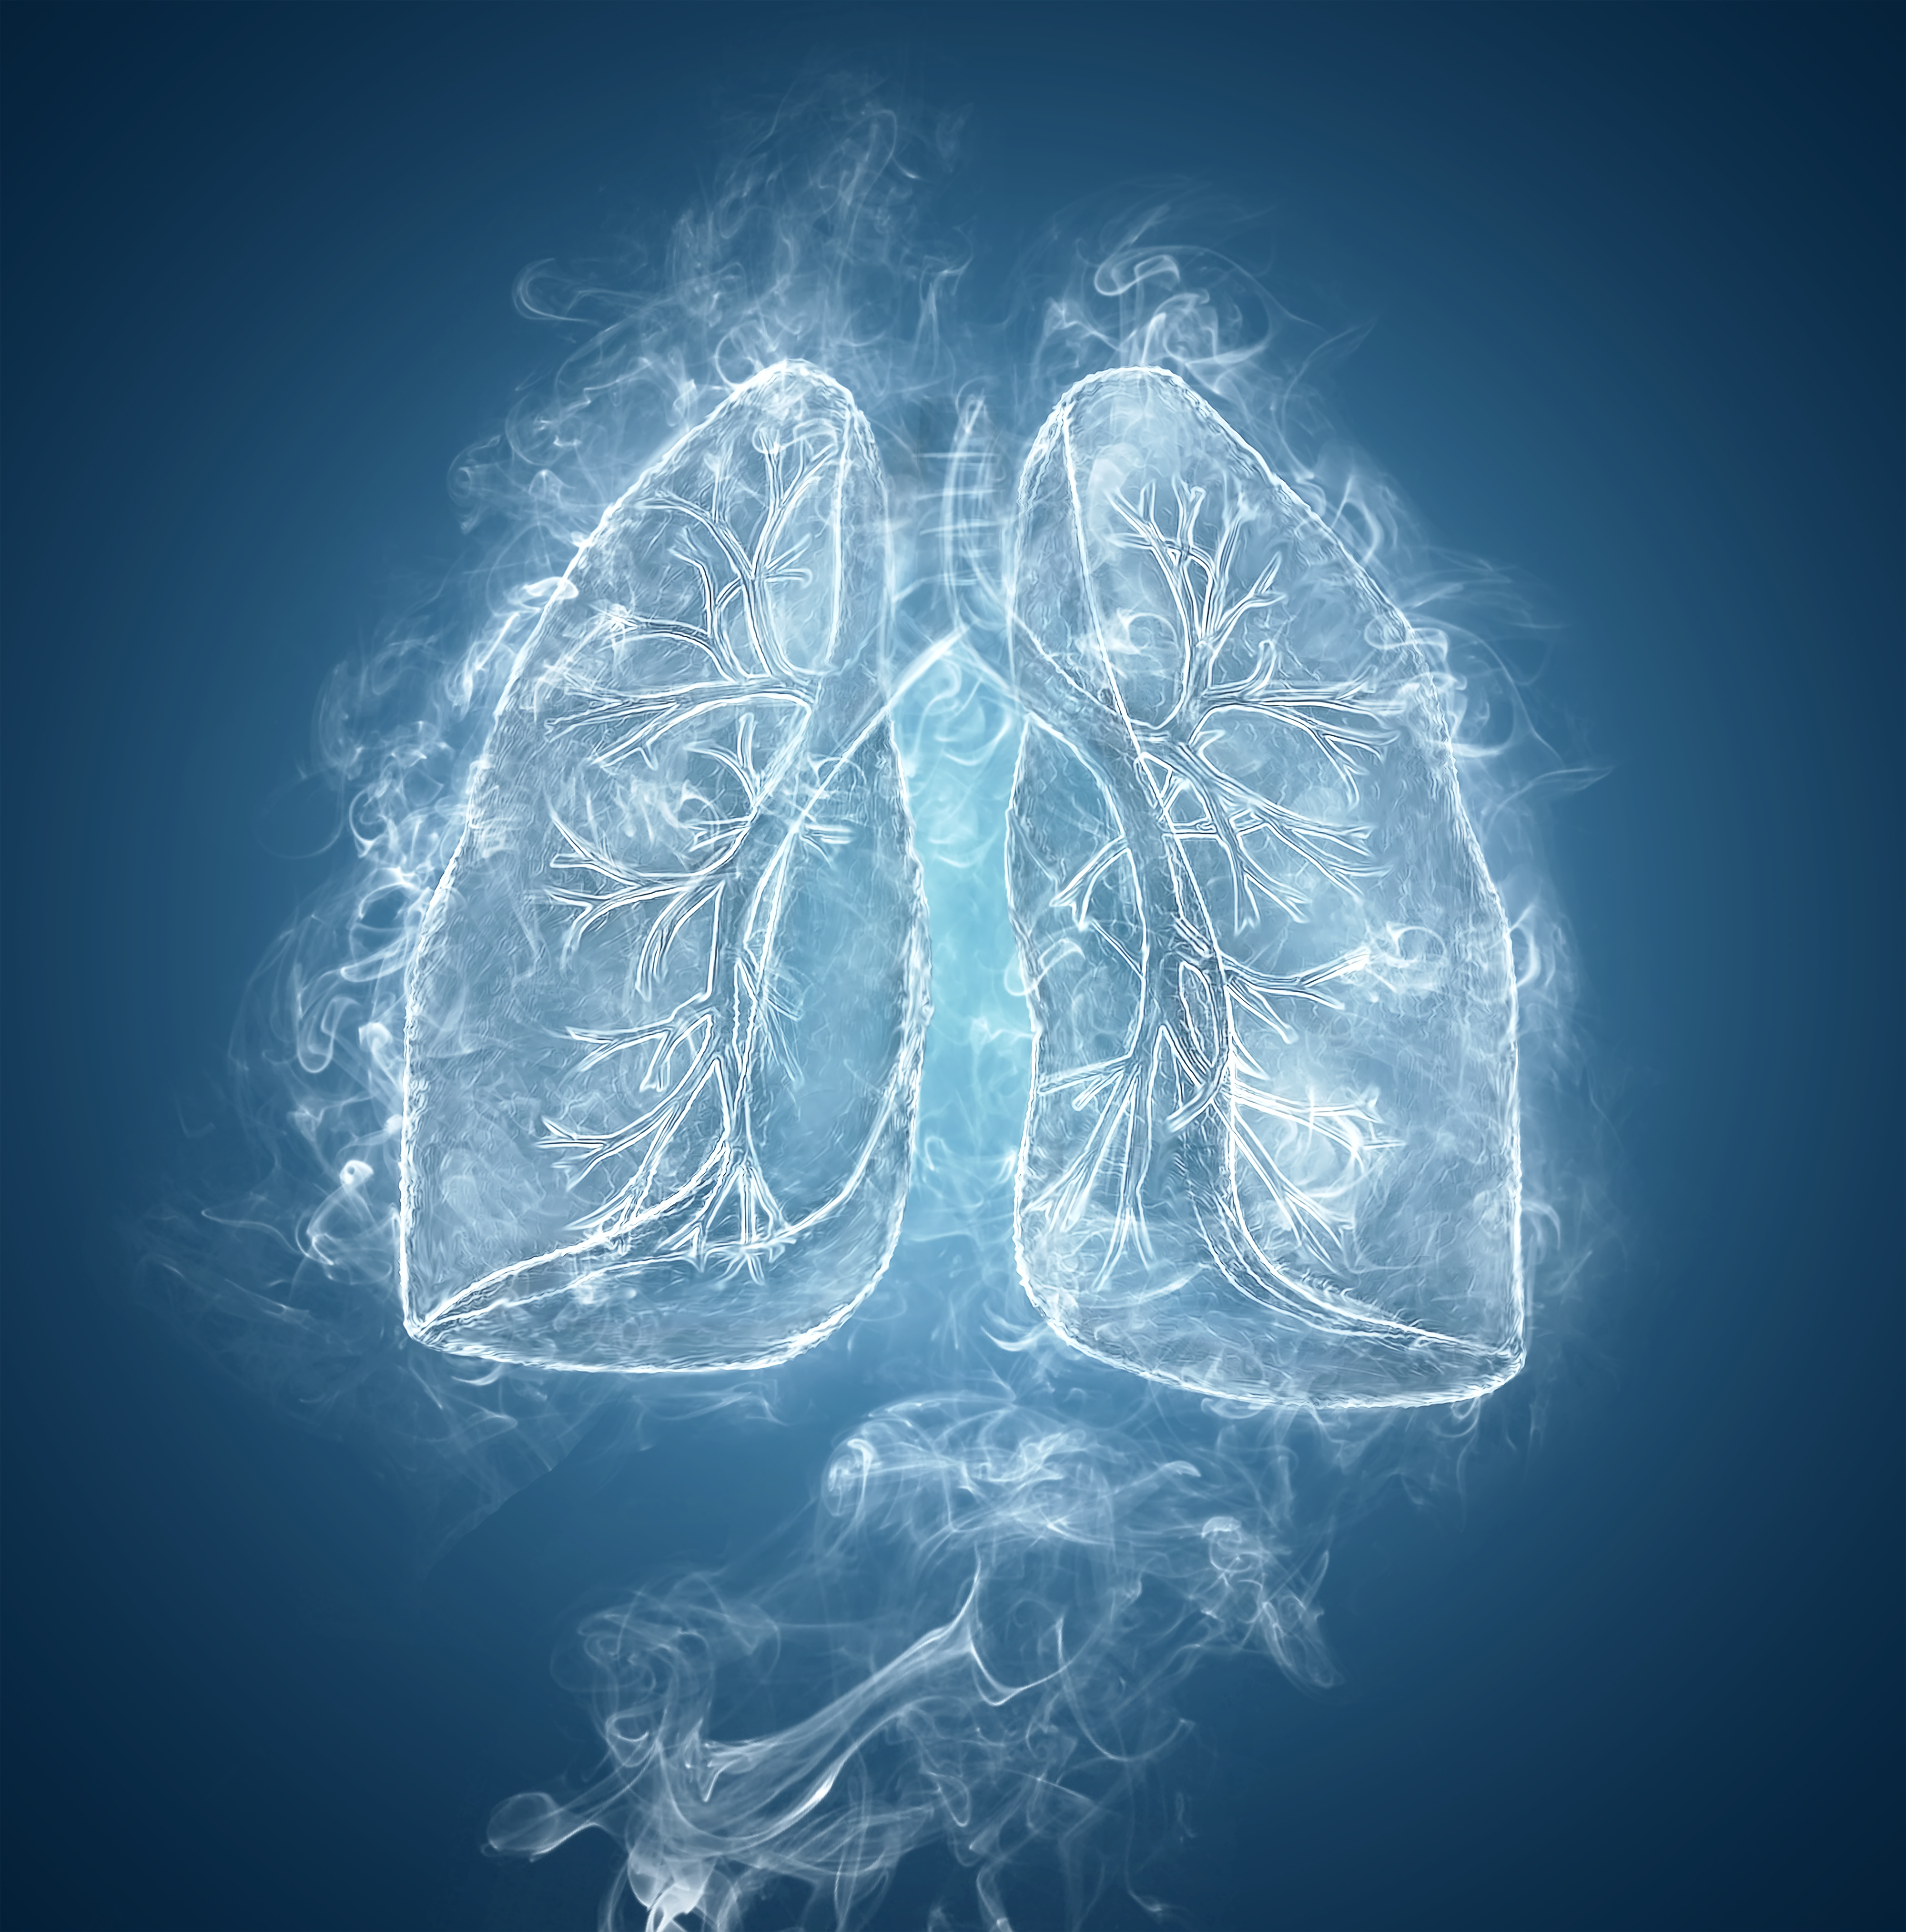 Researchers Find Association Between Combined Bronchiectasis and Lung Cancer in Patients With COPD